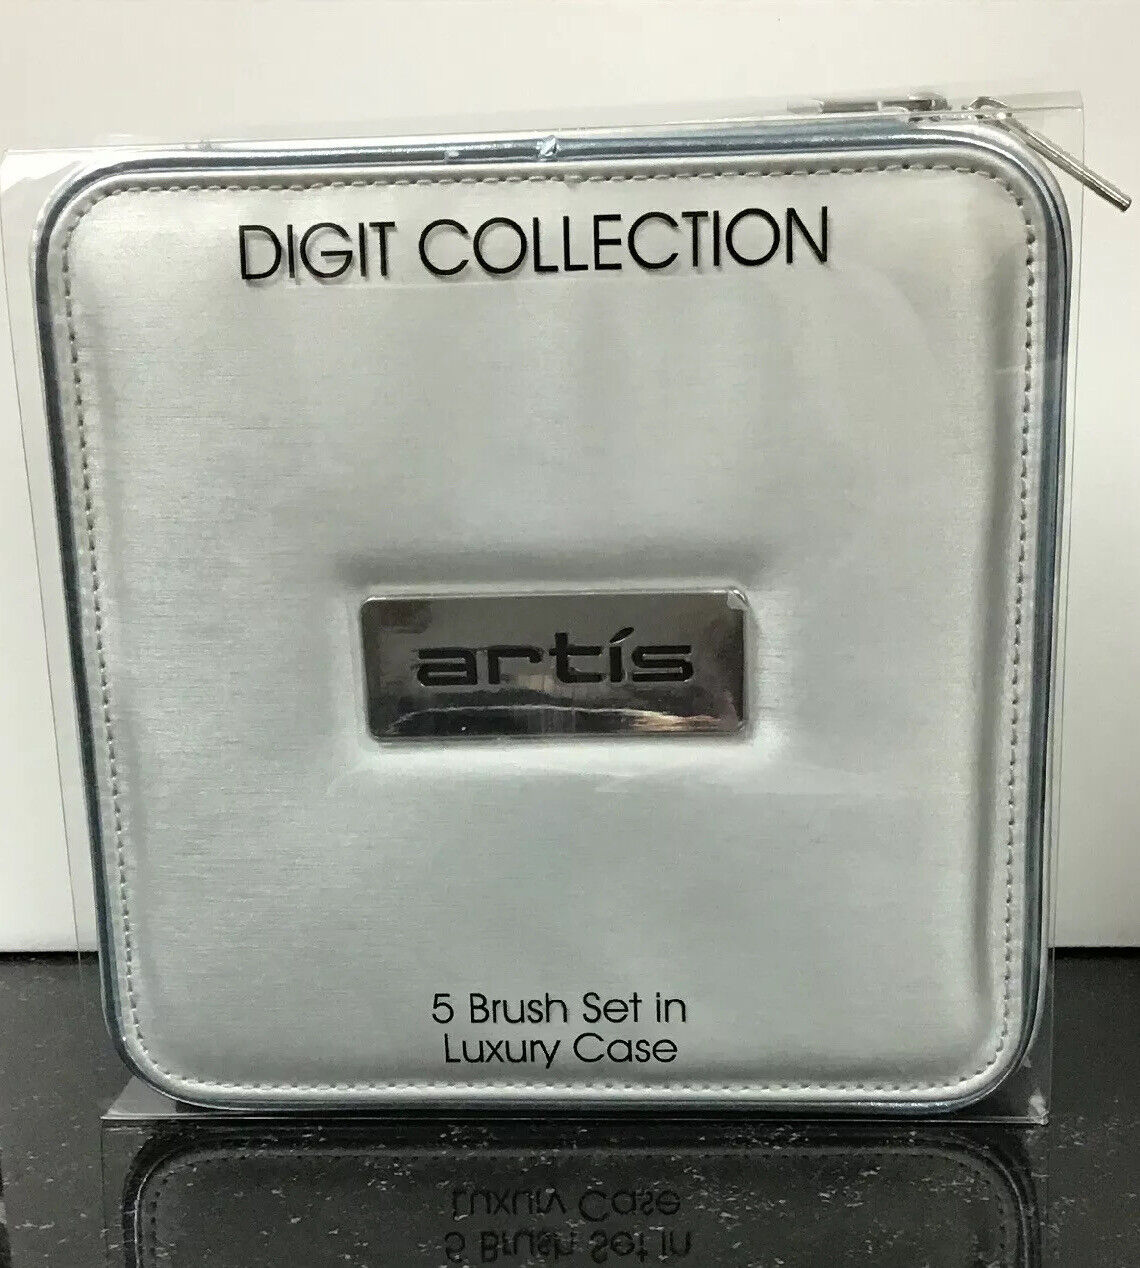 Artis Digit Collection 5 Brush Set In Luxery Case ~ Brand New In Original Box